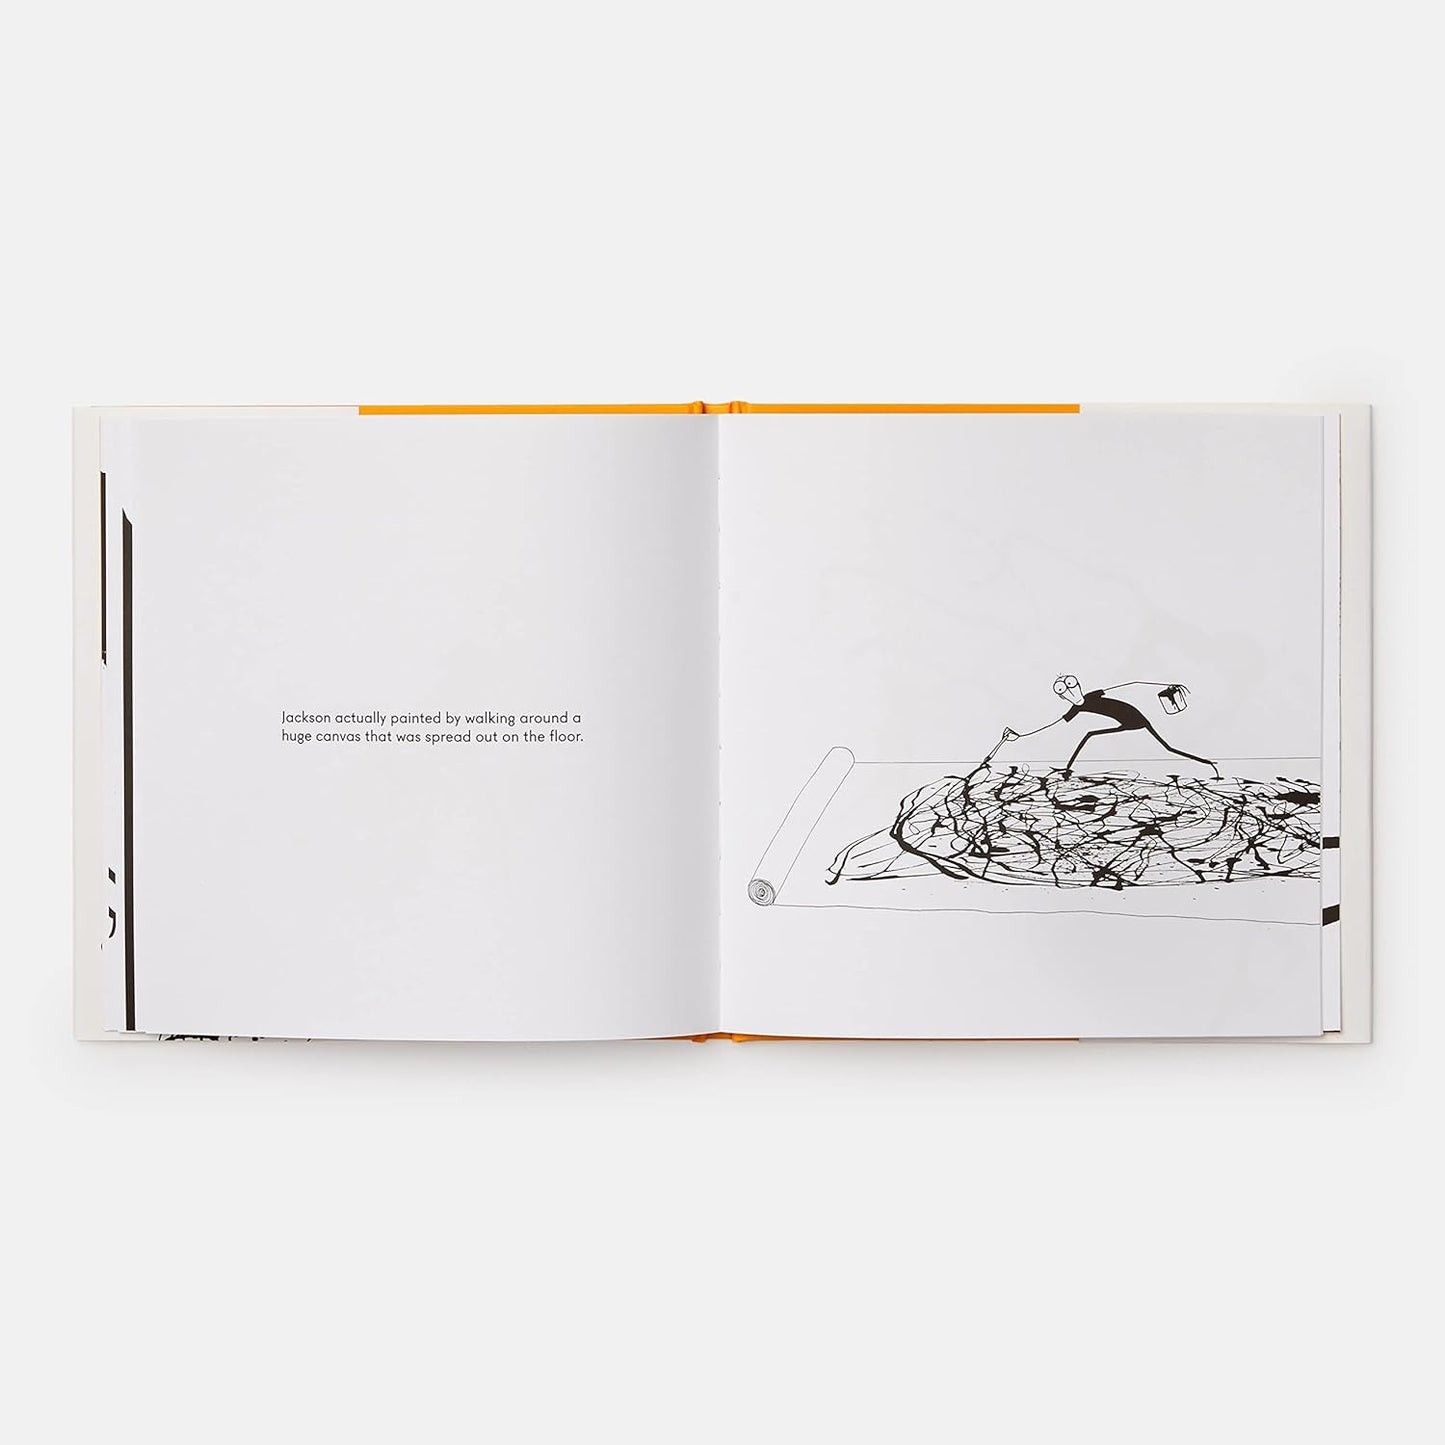 Jackson Pollock Splashed Paint And Wasn't Sorry by Phaidon Press.